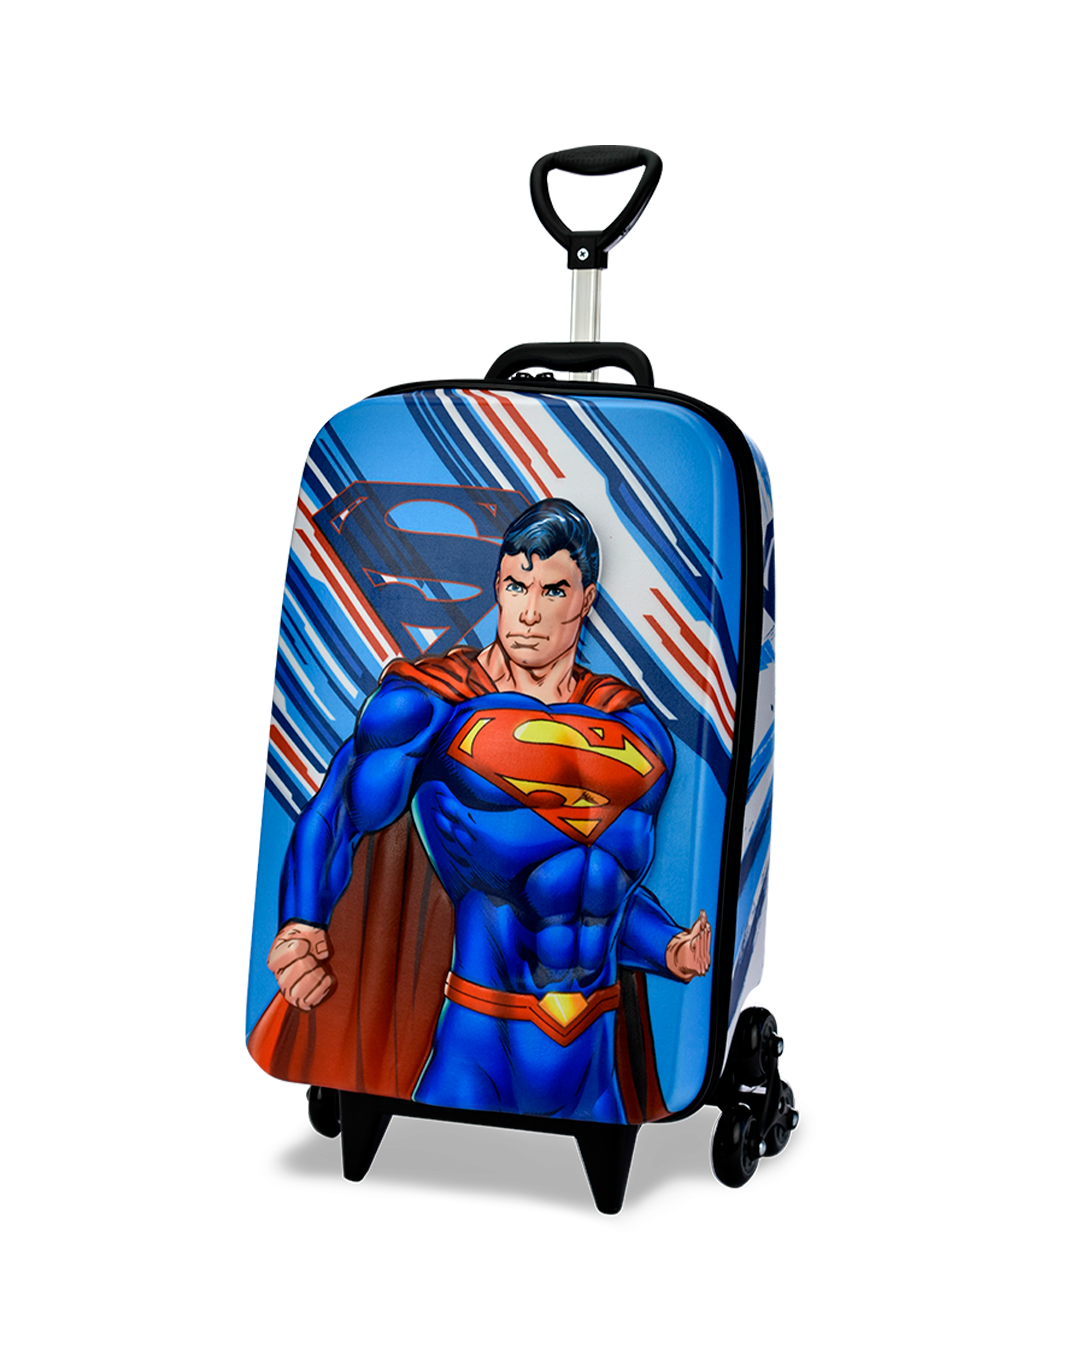 MaxToy Justice League Superman 3D Kids Luggage with Easy 6 Wheel System for your Teens and Kids Hero 